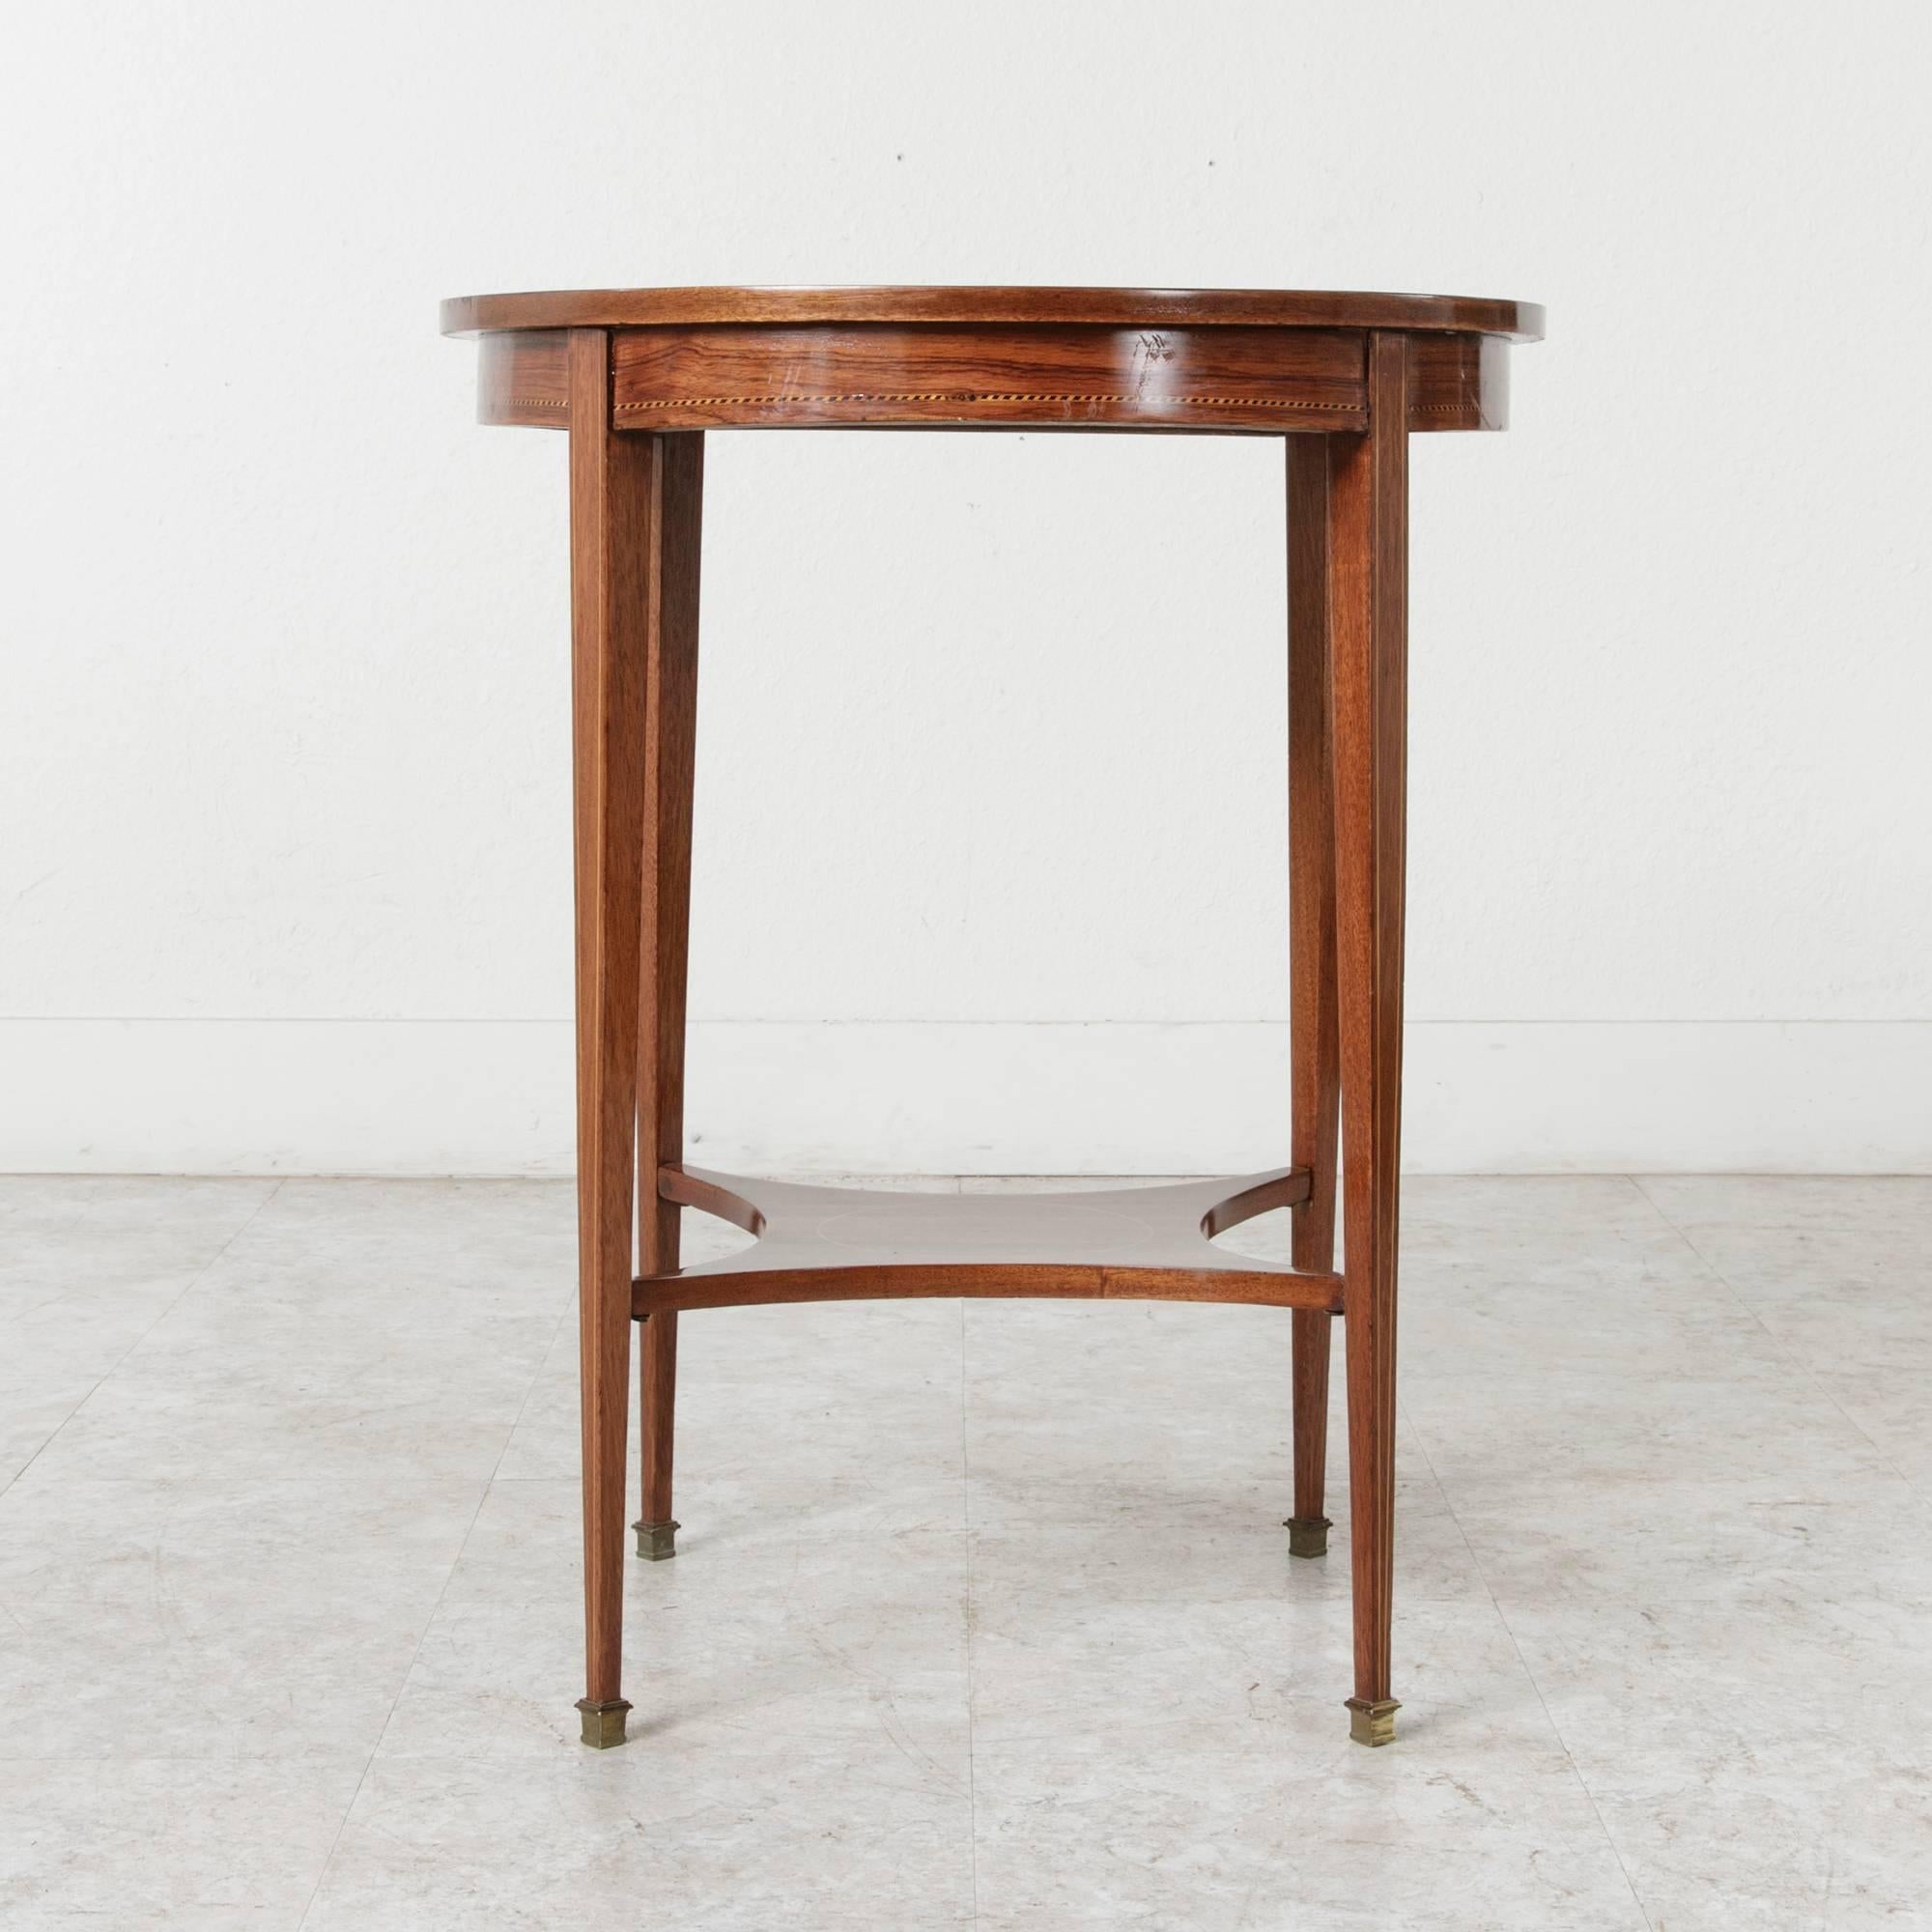 20th Century French Art Deco Period Louis XVI Style Rosewood Marquetry Gueridon Side Table